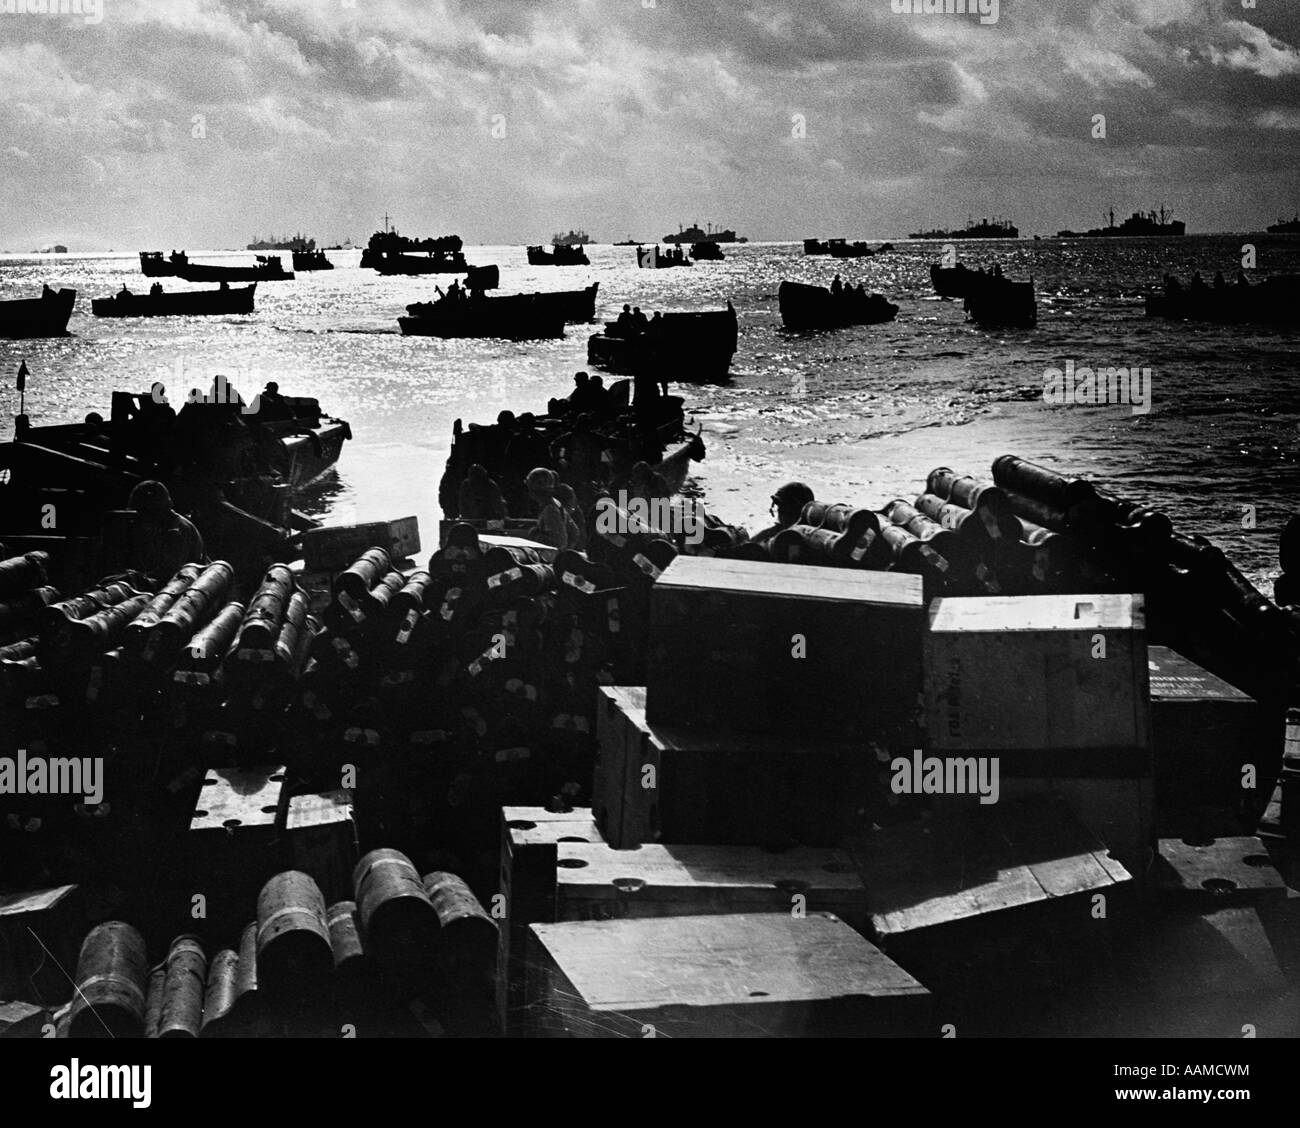 1940s WORLD WAR II DAWN DUSK COAST GUARD LANDING CRAFT CROWDING SHALLOW INVASION WATERS SOLDIERS Stock Photo